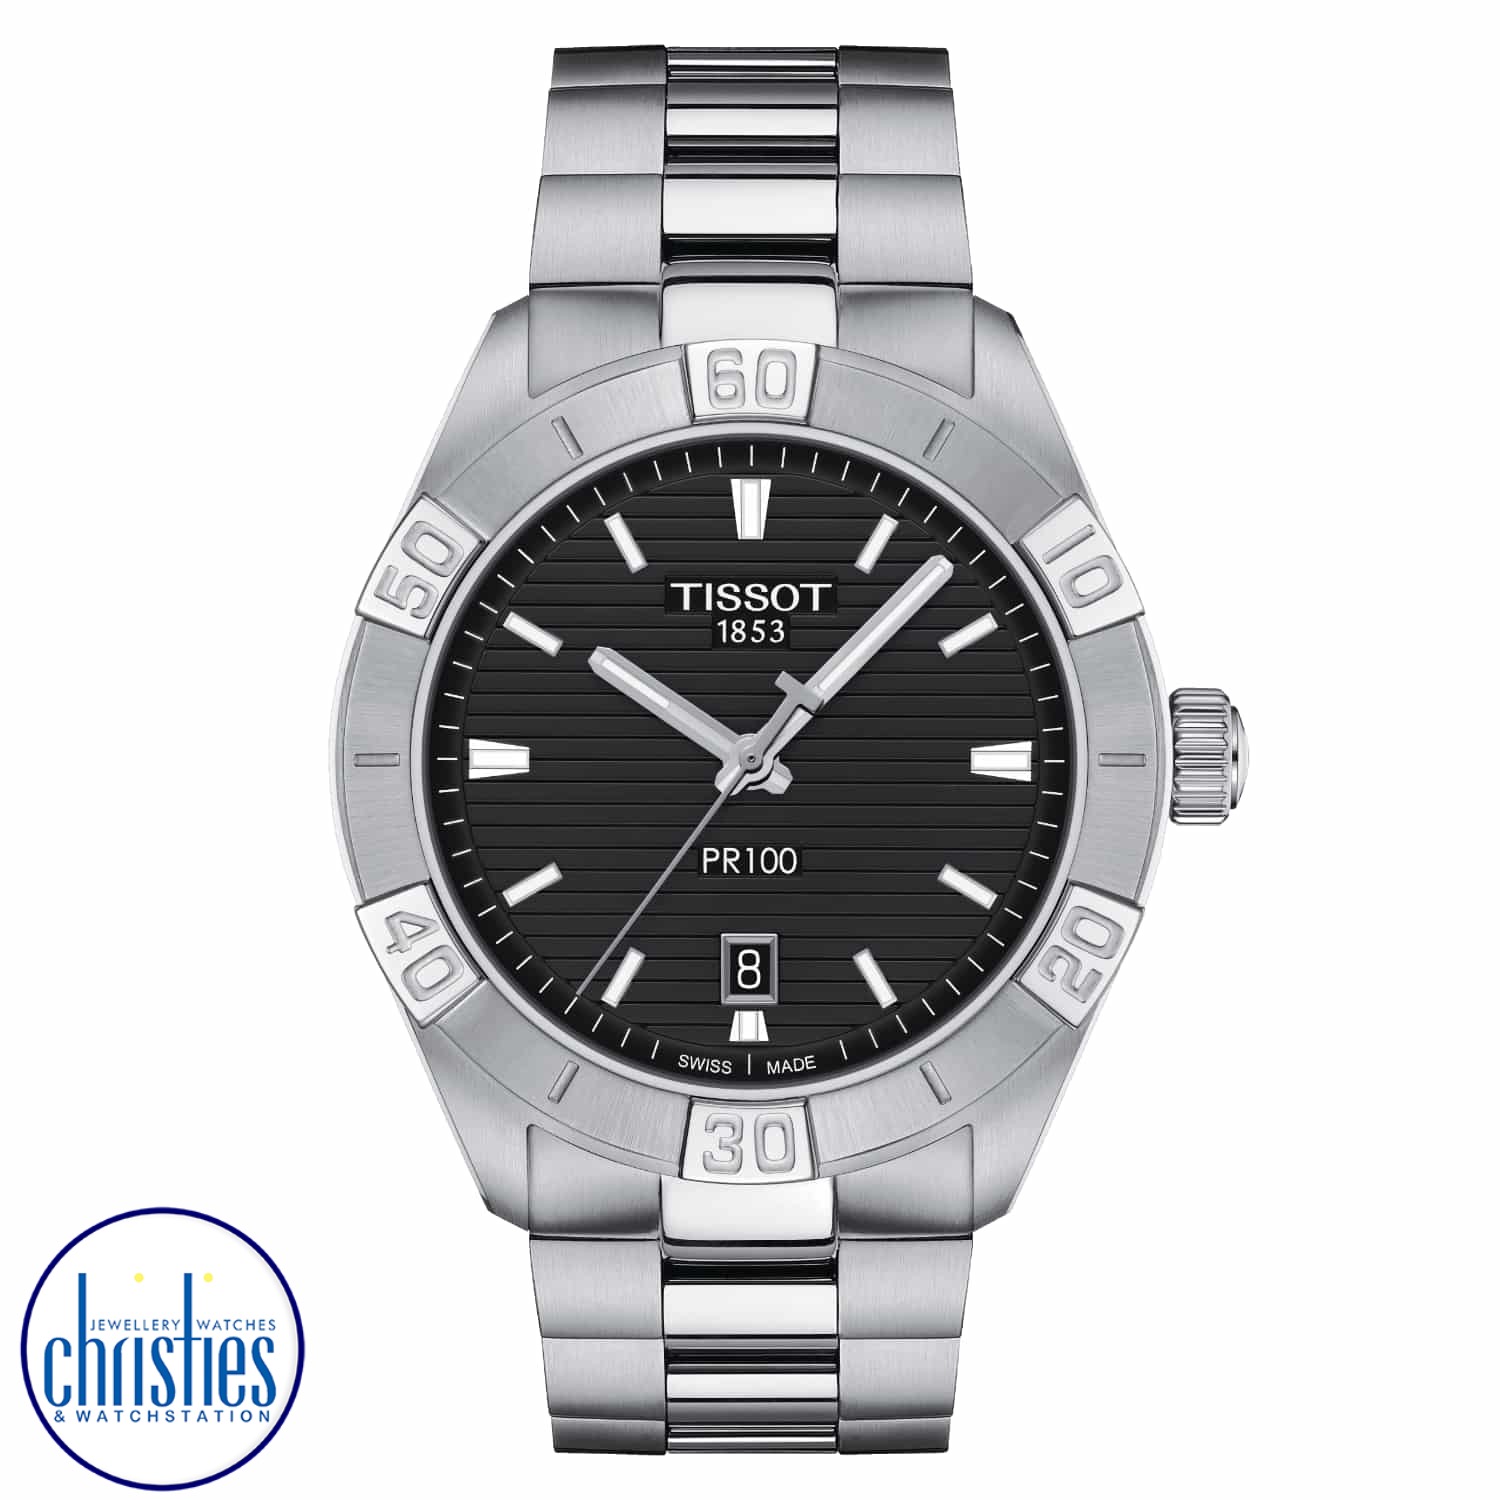 T101.610.11.051.00 TISSOT T-Classic PR 100 Sport Watch. The purpose of the Tissot PR 100 Sport Gent is to propose a sporty and chic watch for everyday look. It features the simple and elegant face the collection is loved for. The watch is water-resistance